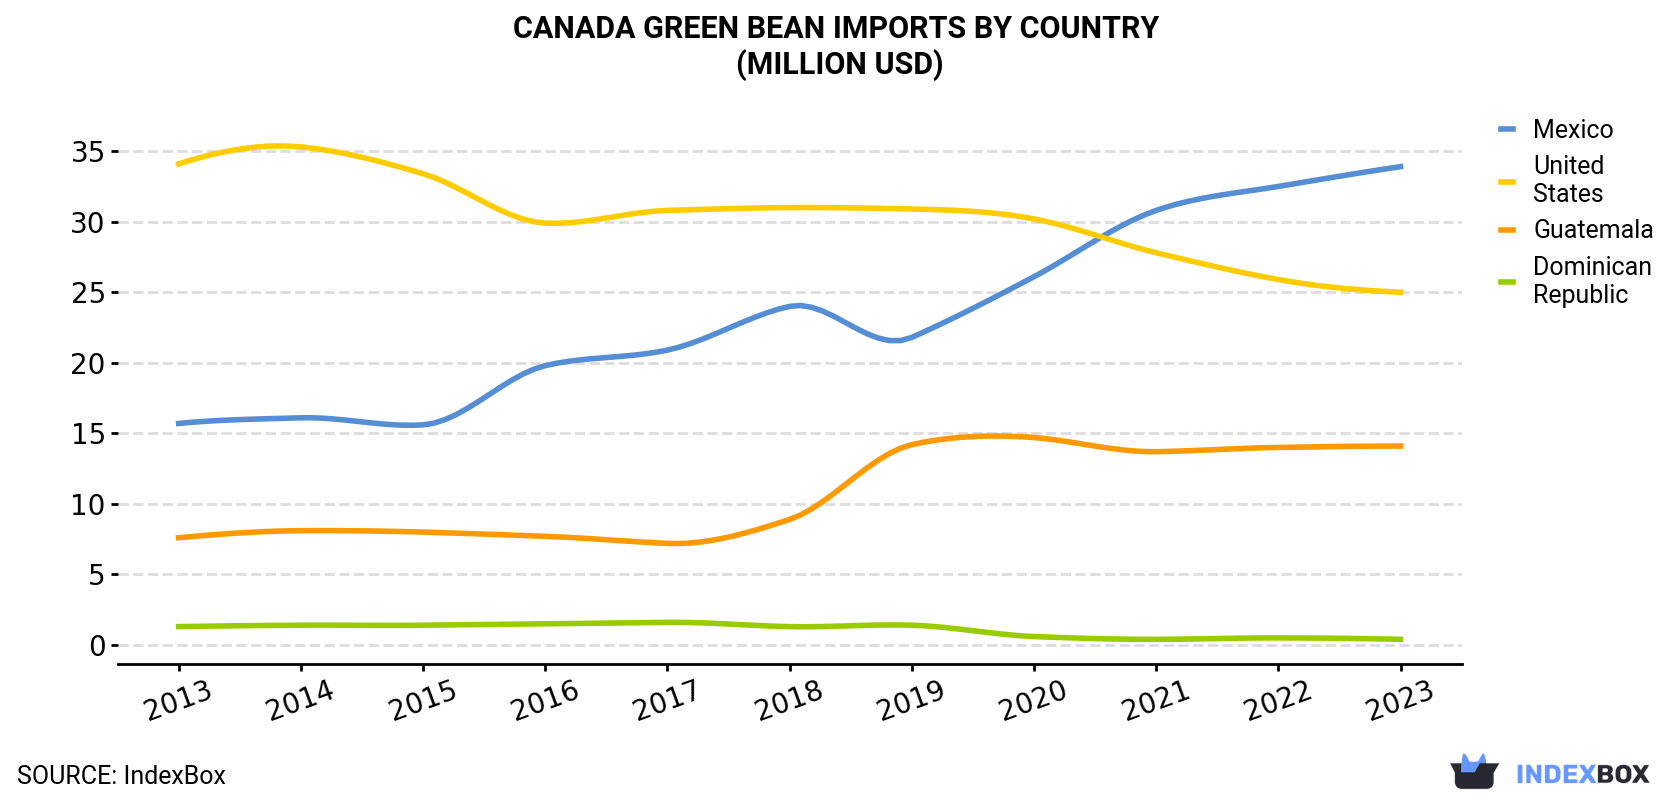 Canada Green Bean Imports By Country (Million USD)